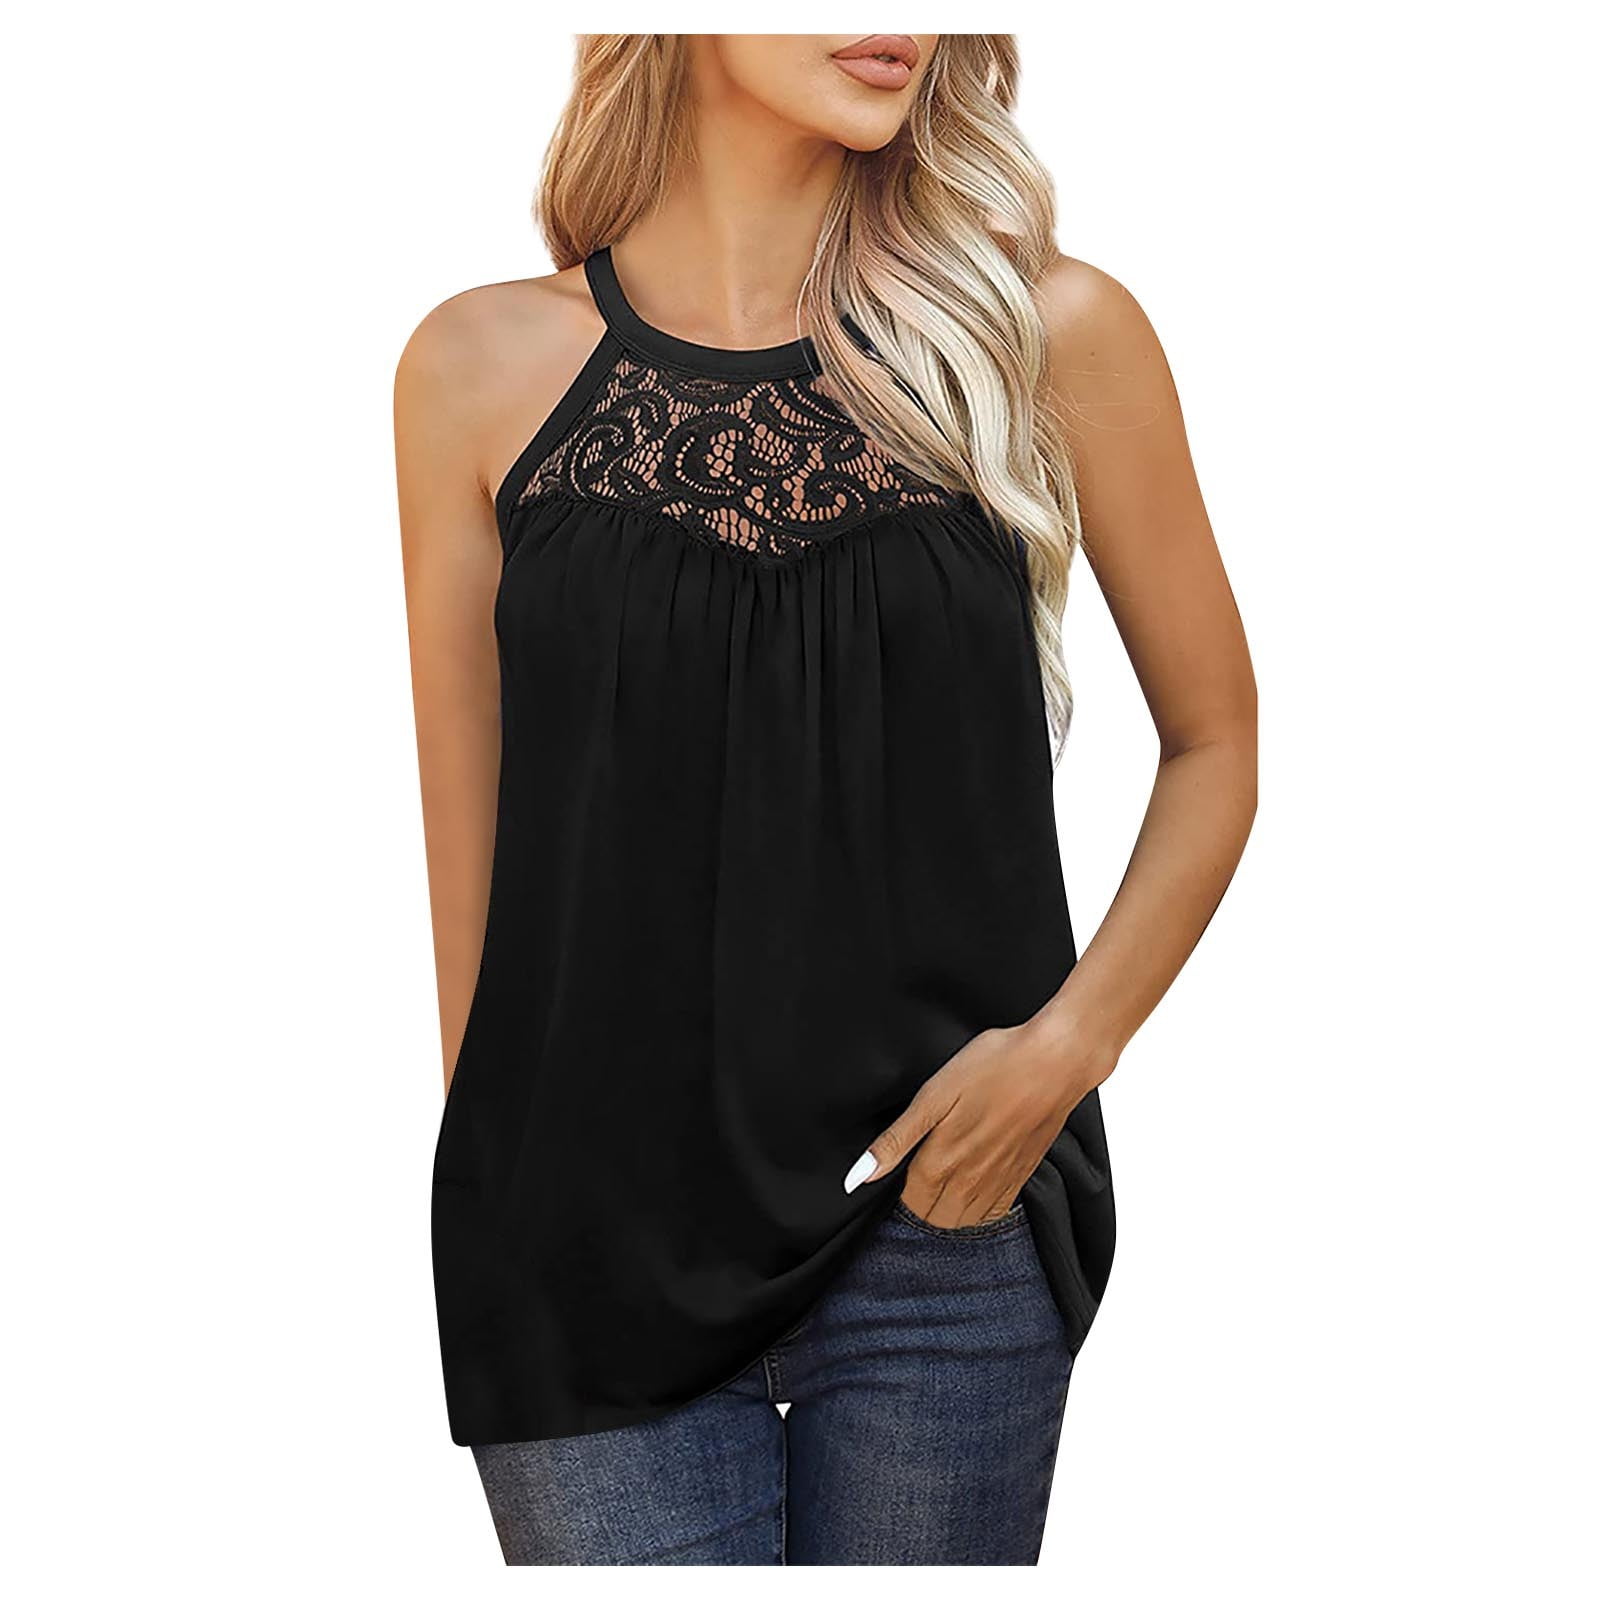 Tank Top for Women Loose Fit Trendy Lace Flowy Tank Tops Sleeveless Dressy Shirts  Blouses Halter Spaghetti Strap Women's Tops,Black M 